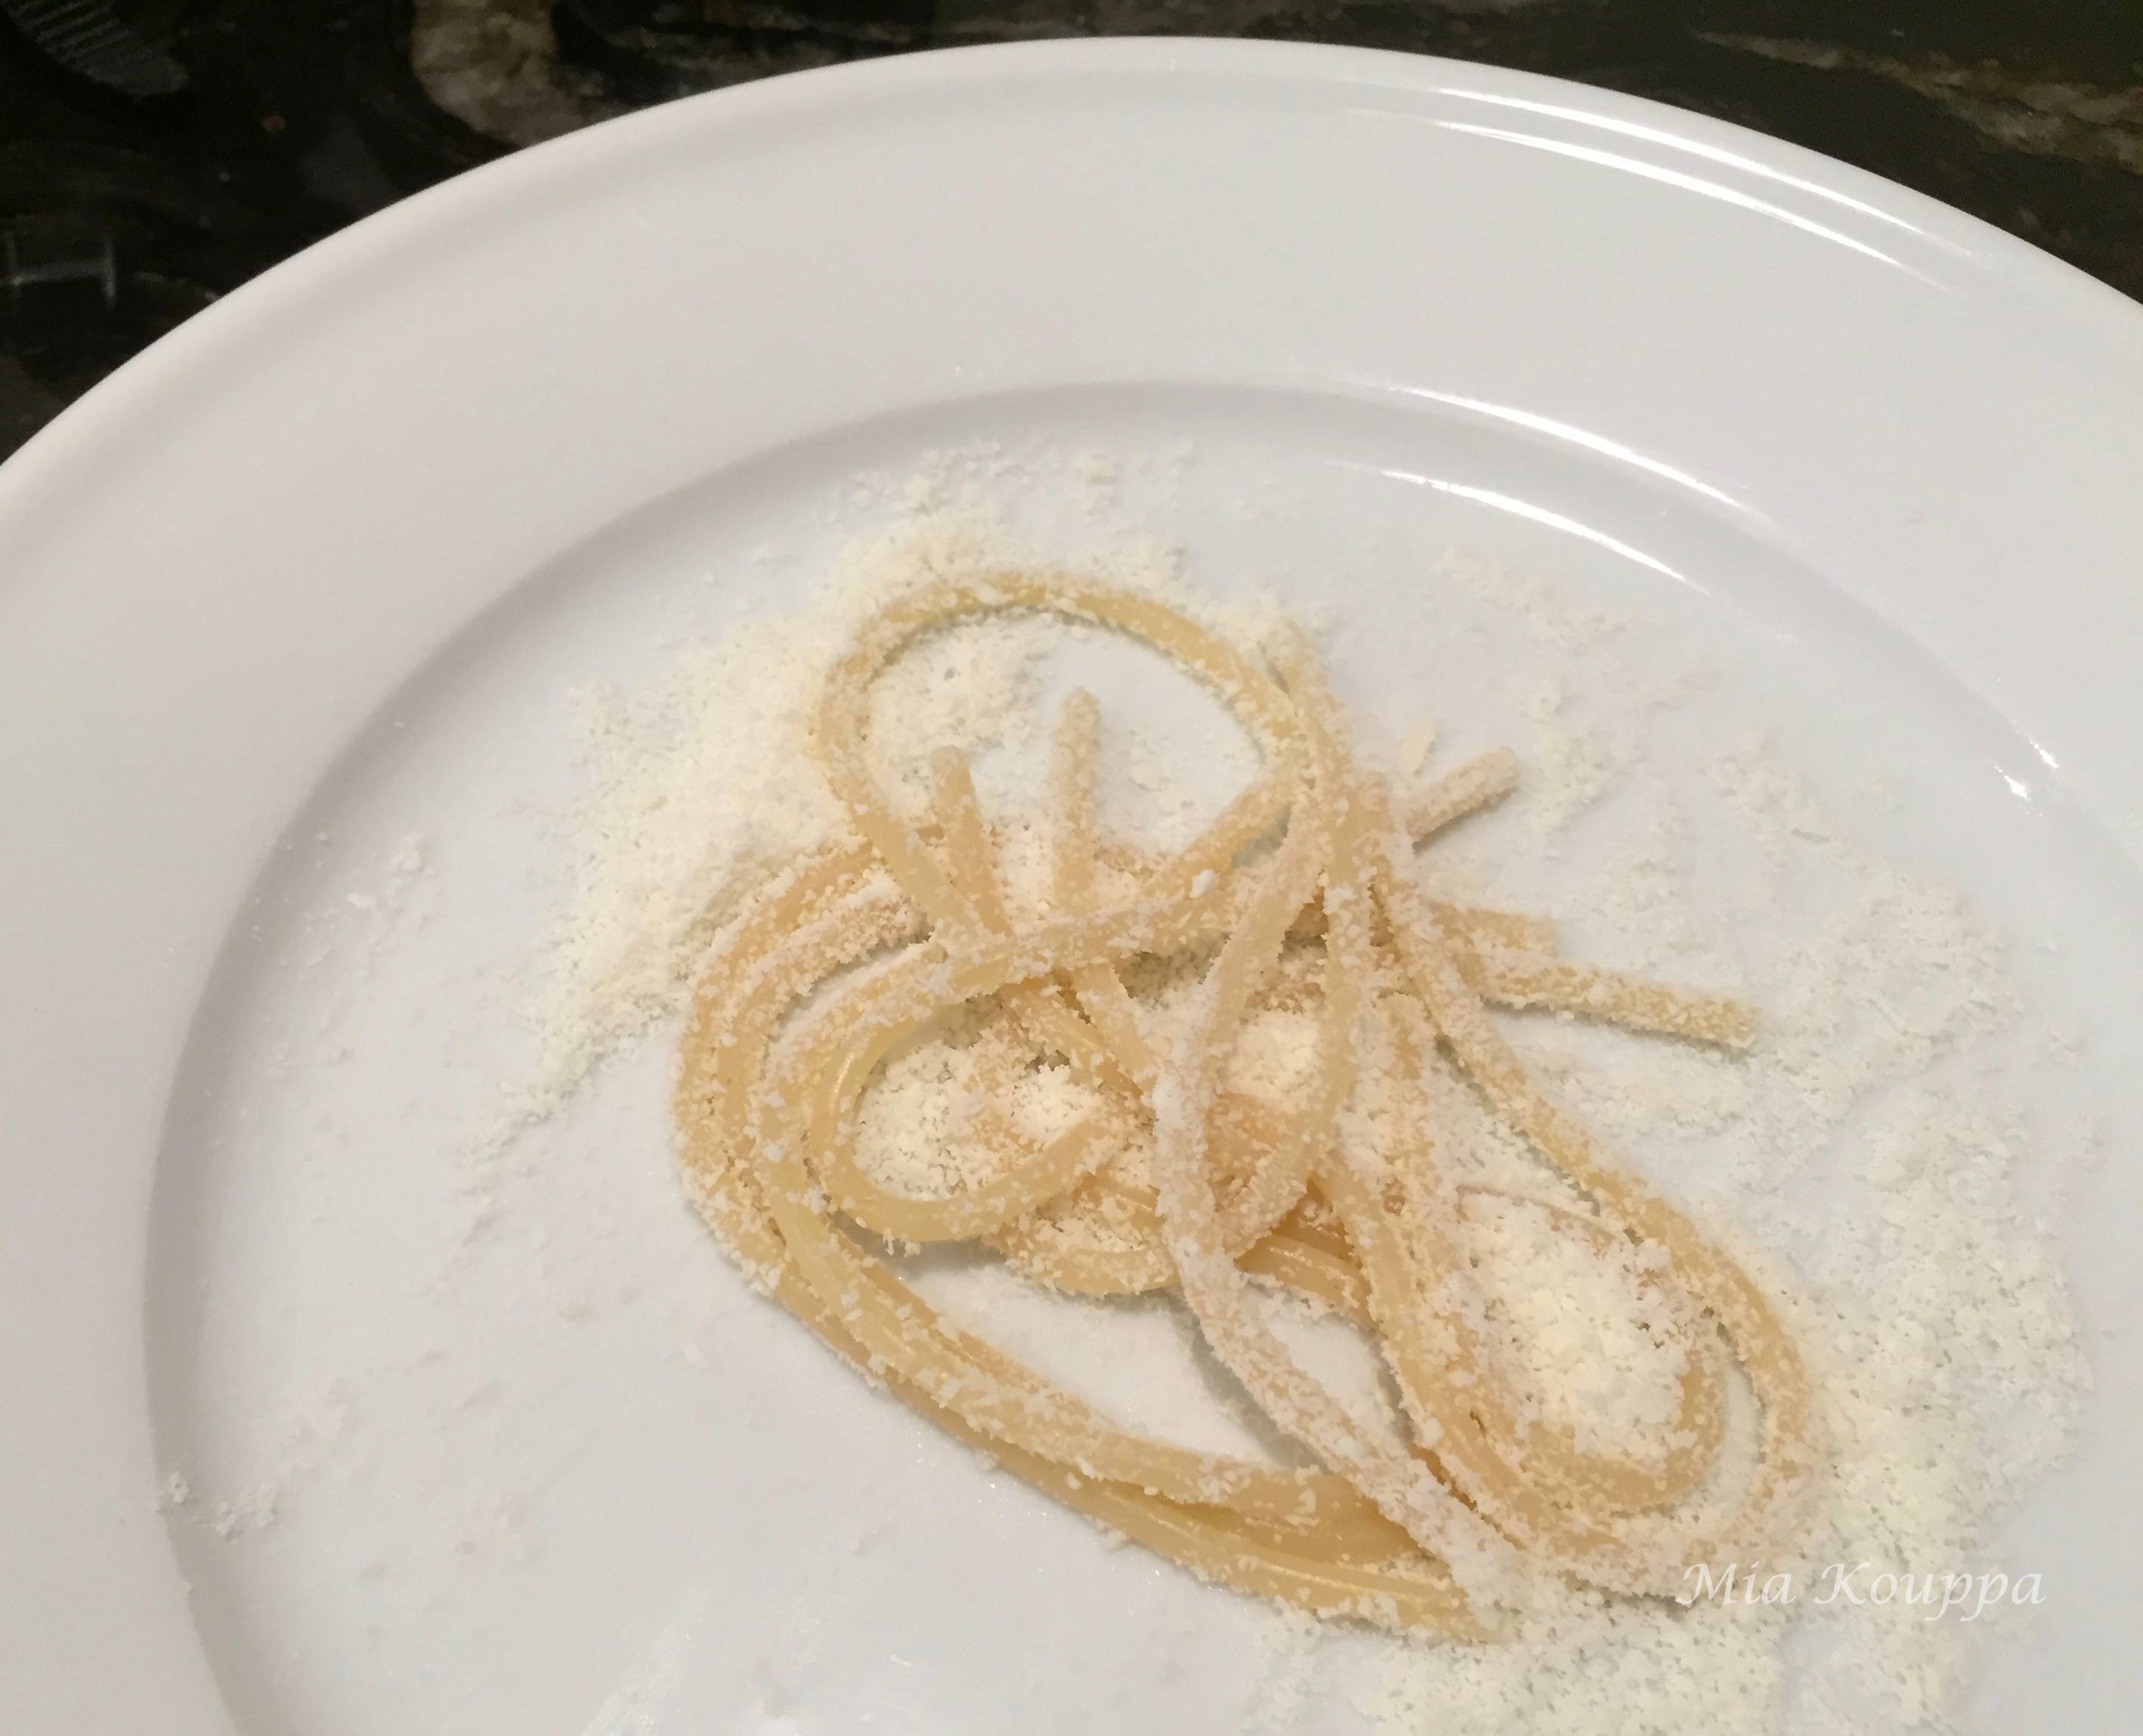 Spaghetti with Olive oil and Greek mizithra (cheese)